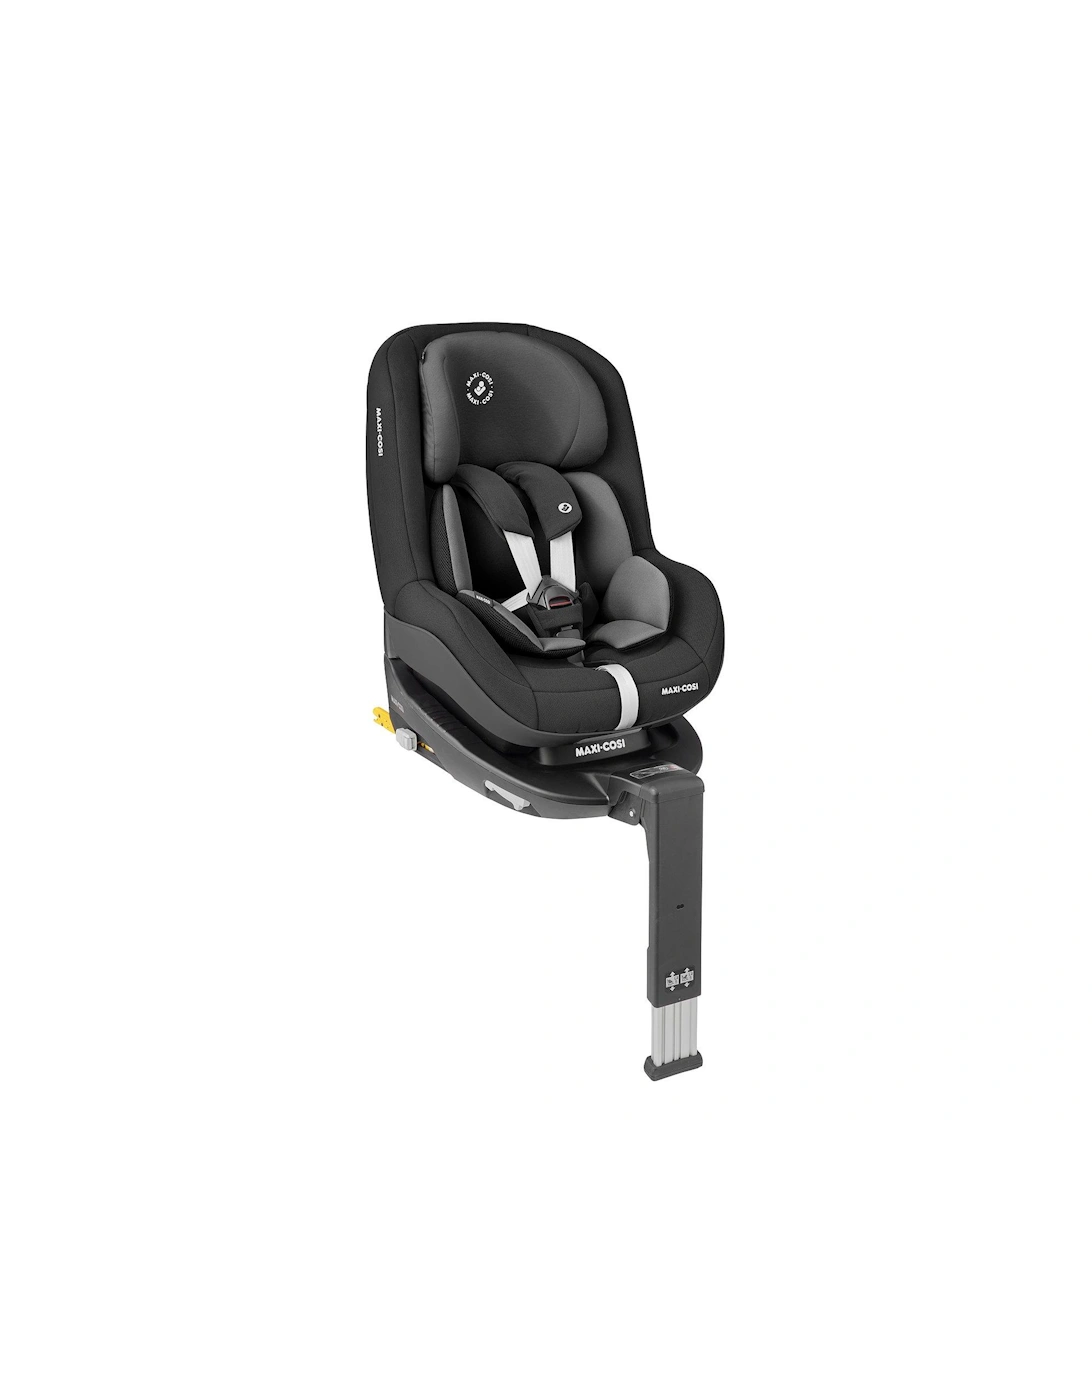 Maxi-Cosi Pearl Pro2 Toddler Car Seat i-Size (6 months - 4 years) - Authentic Black, 2 of 1